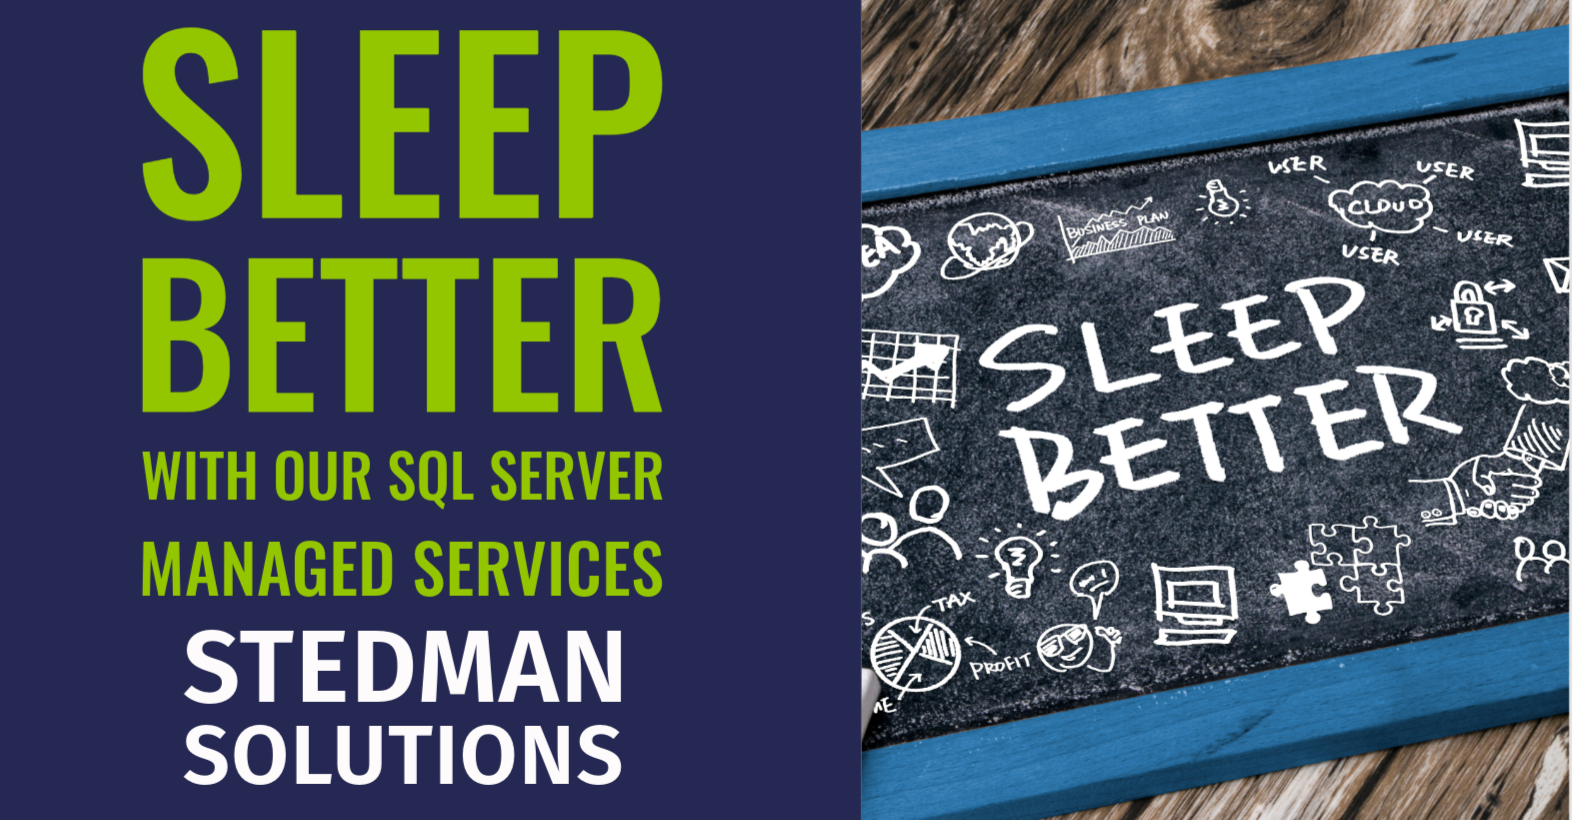 Sleep Better With Managed Services From Stedman Solutions, LLC.